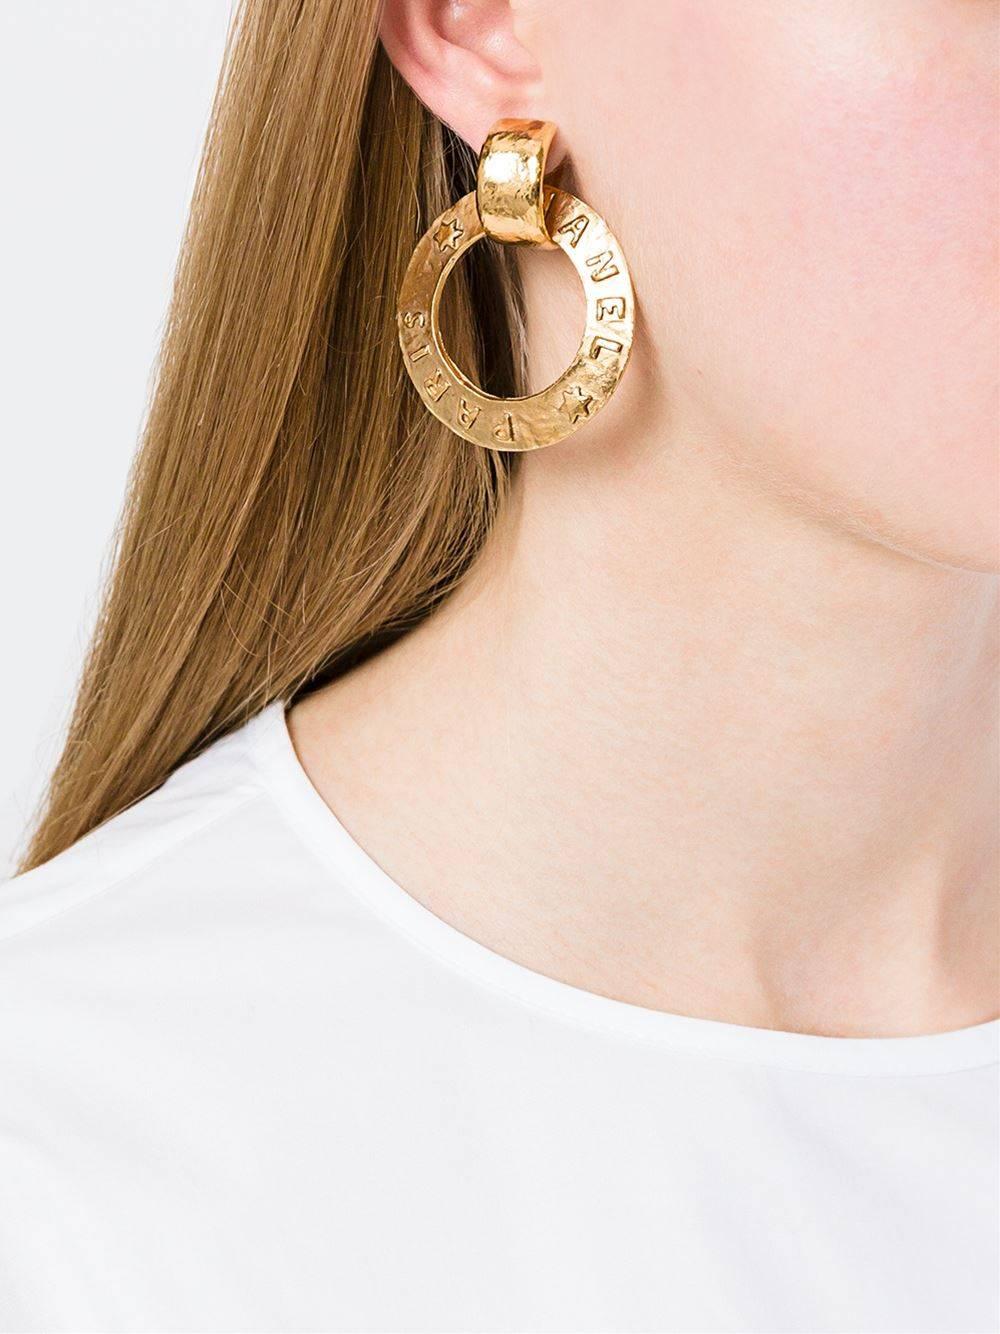 Chanel Vintage Gold 'Chanel Paris' Round Two in One Dangle Doorknocker Earrings

Metal
Gold tone
Clip on closure
Made in France
Width 2"
Drop 2.2"